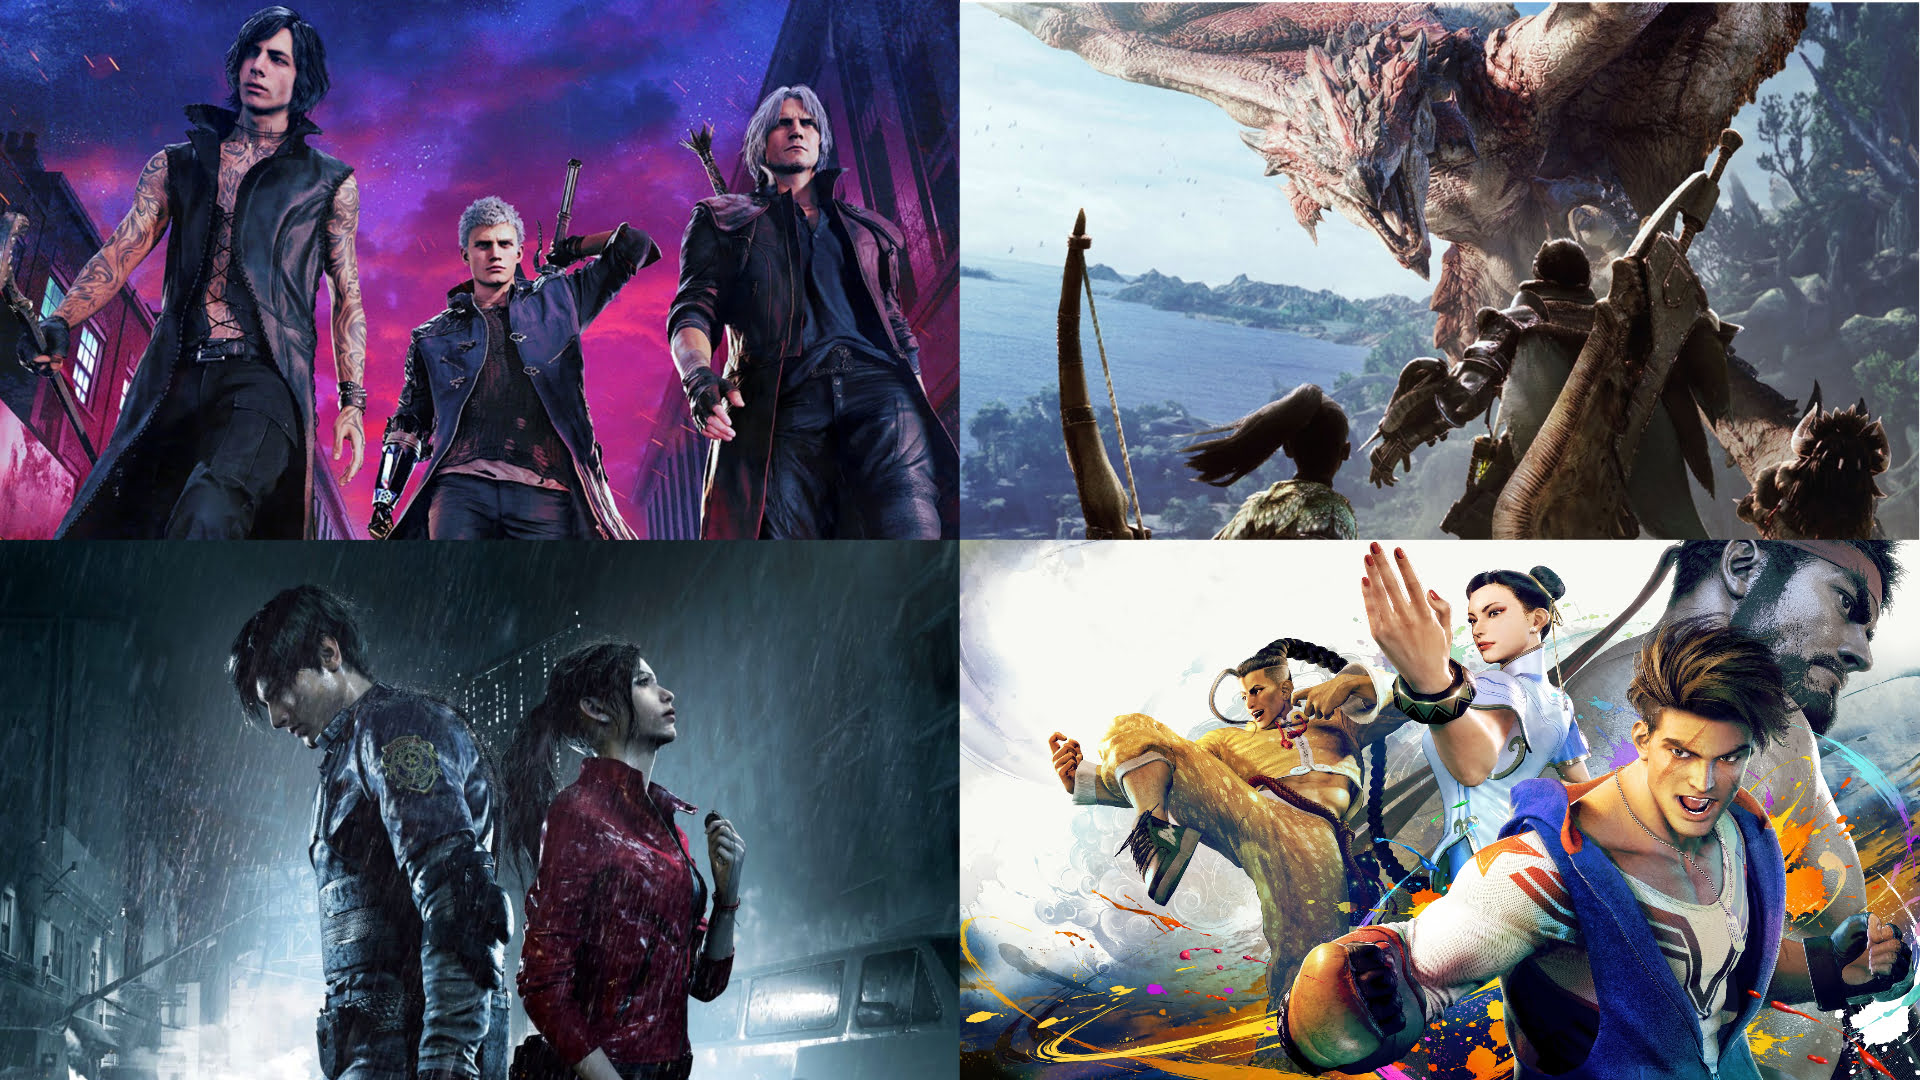 Four Capcom Games Incuding Devil May Cry 5, Monster Hunter: World, Resident Evil 2, And Street Fighter 6